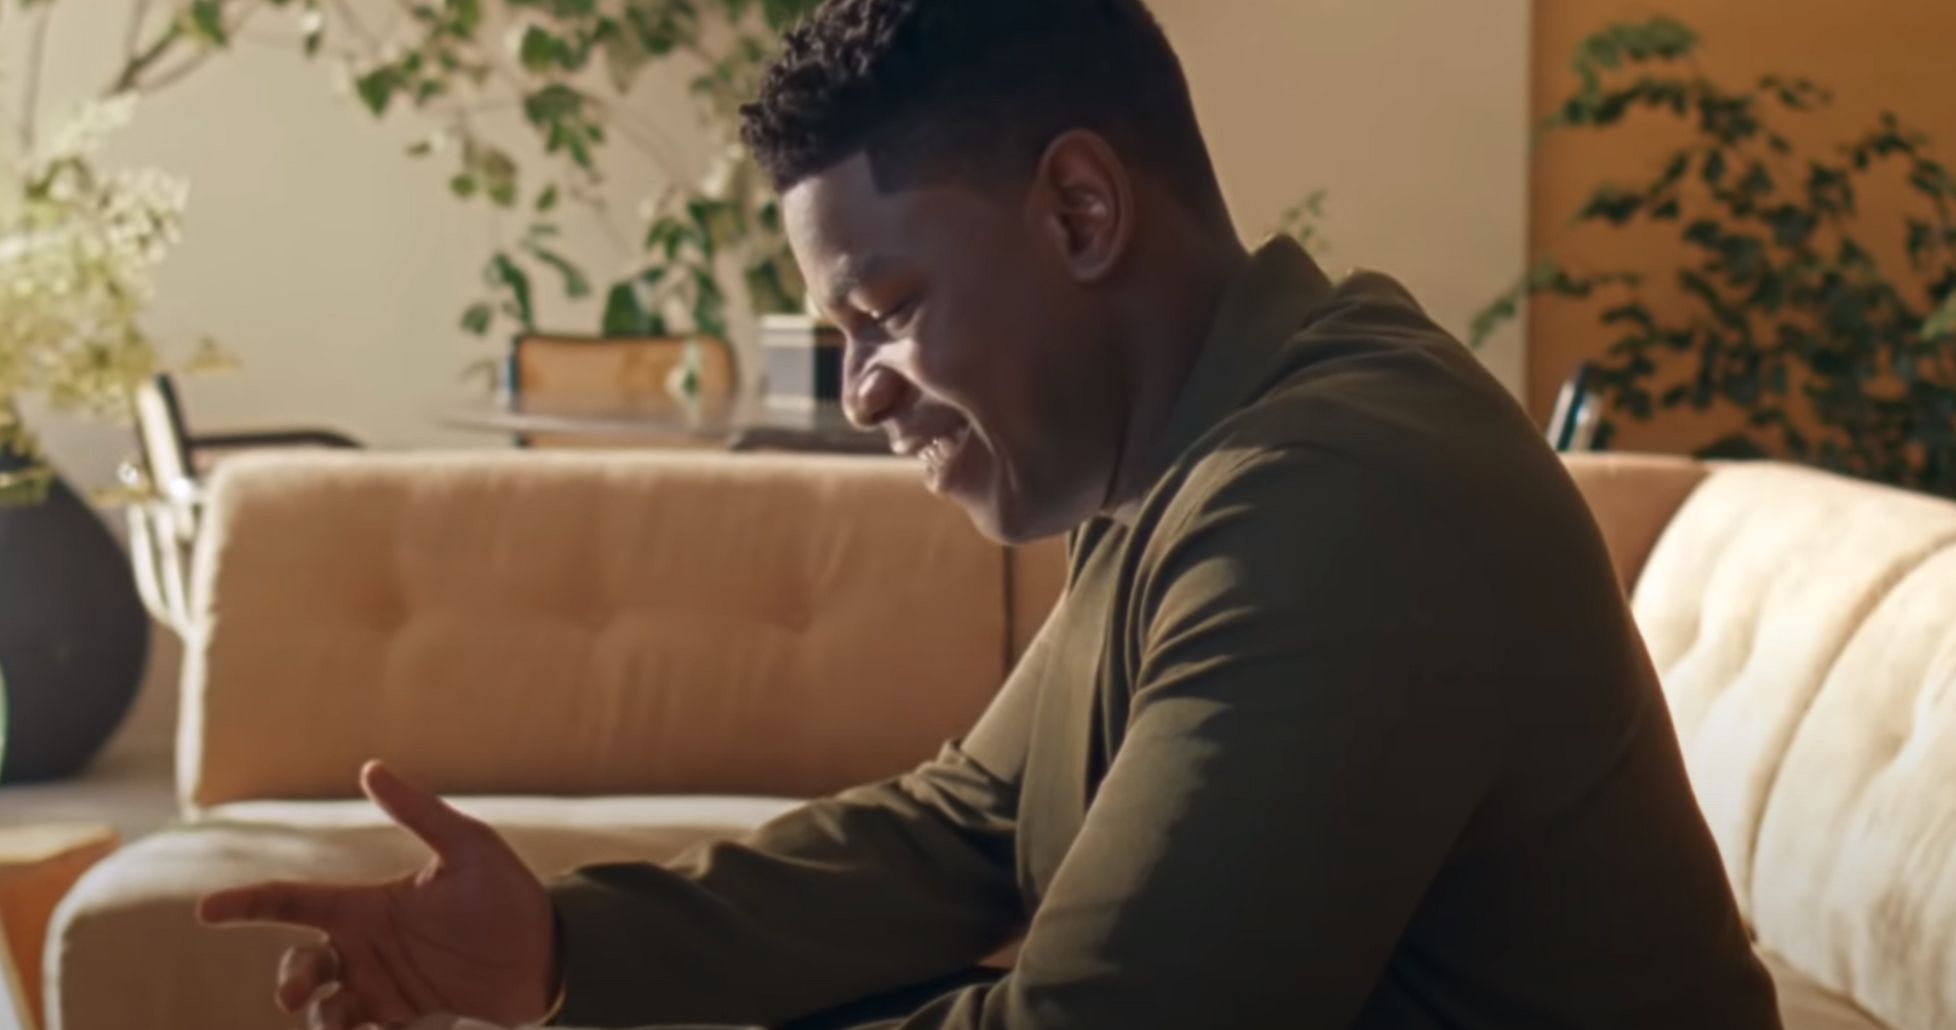 China Cuts Star Wars Actor John Boyega Out of Cologne Commercial He Directed